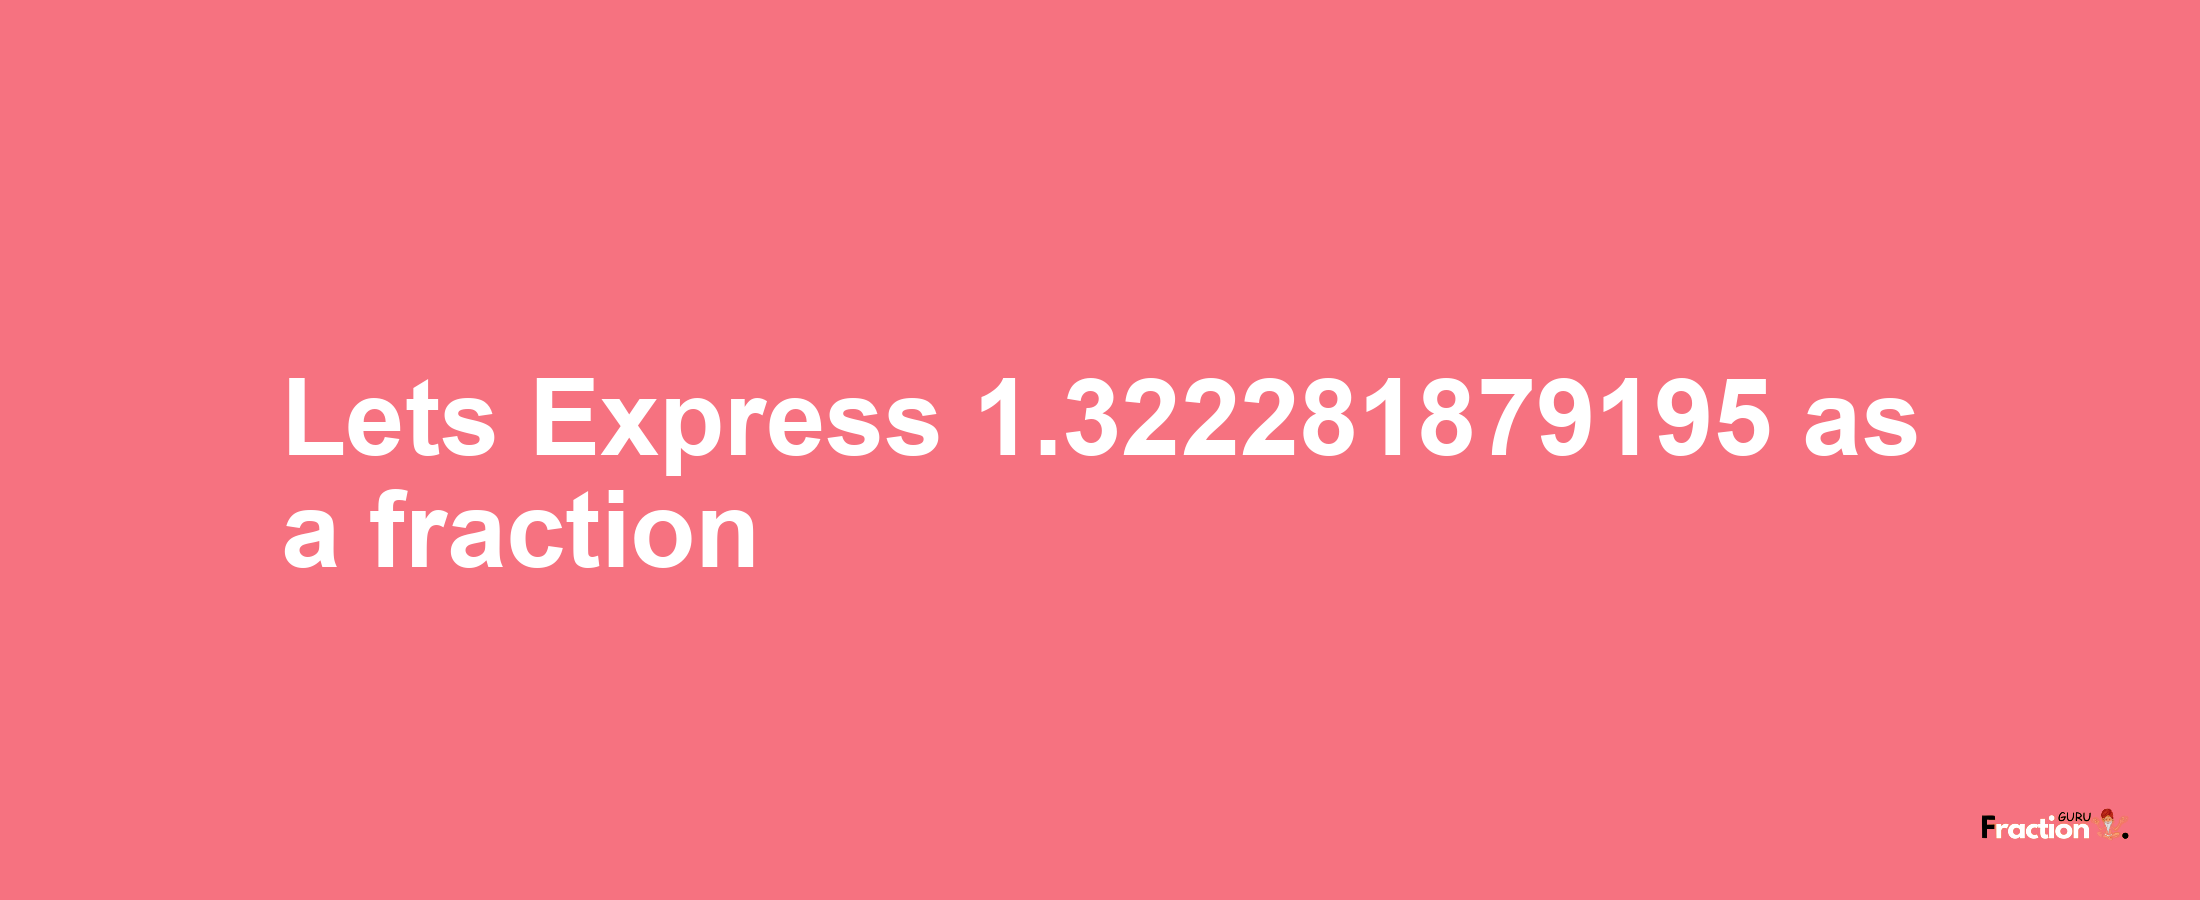 Lets Express 1.322281879195 as afraction